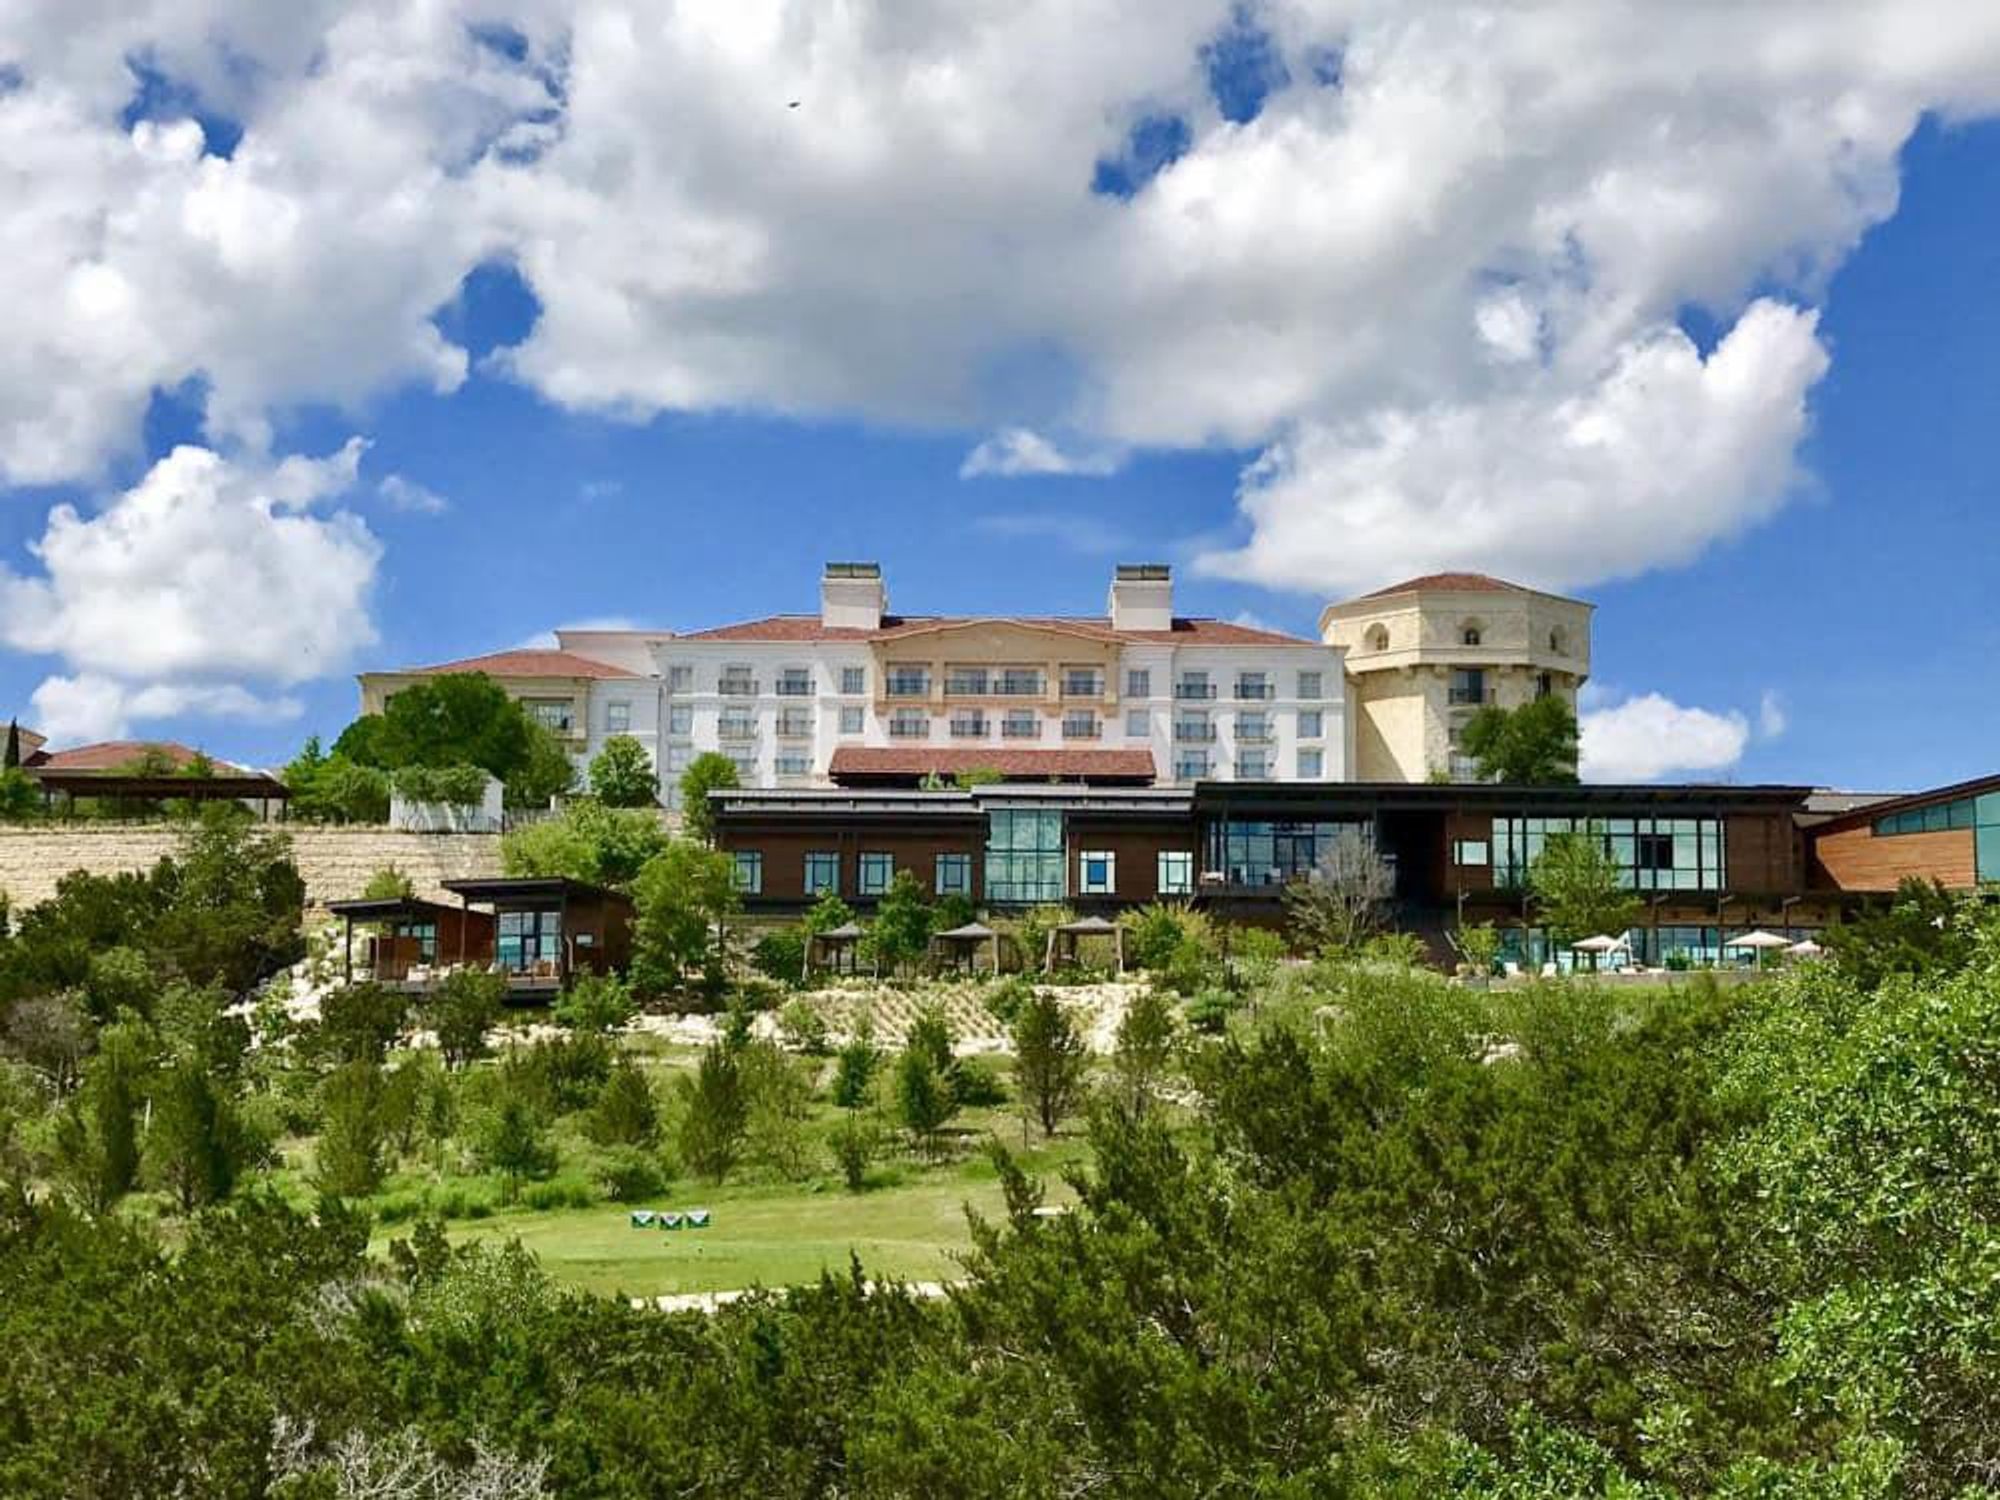 La Cantera Resort & Spa is one of the best places to stay in San